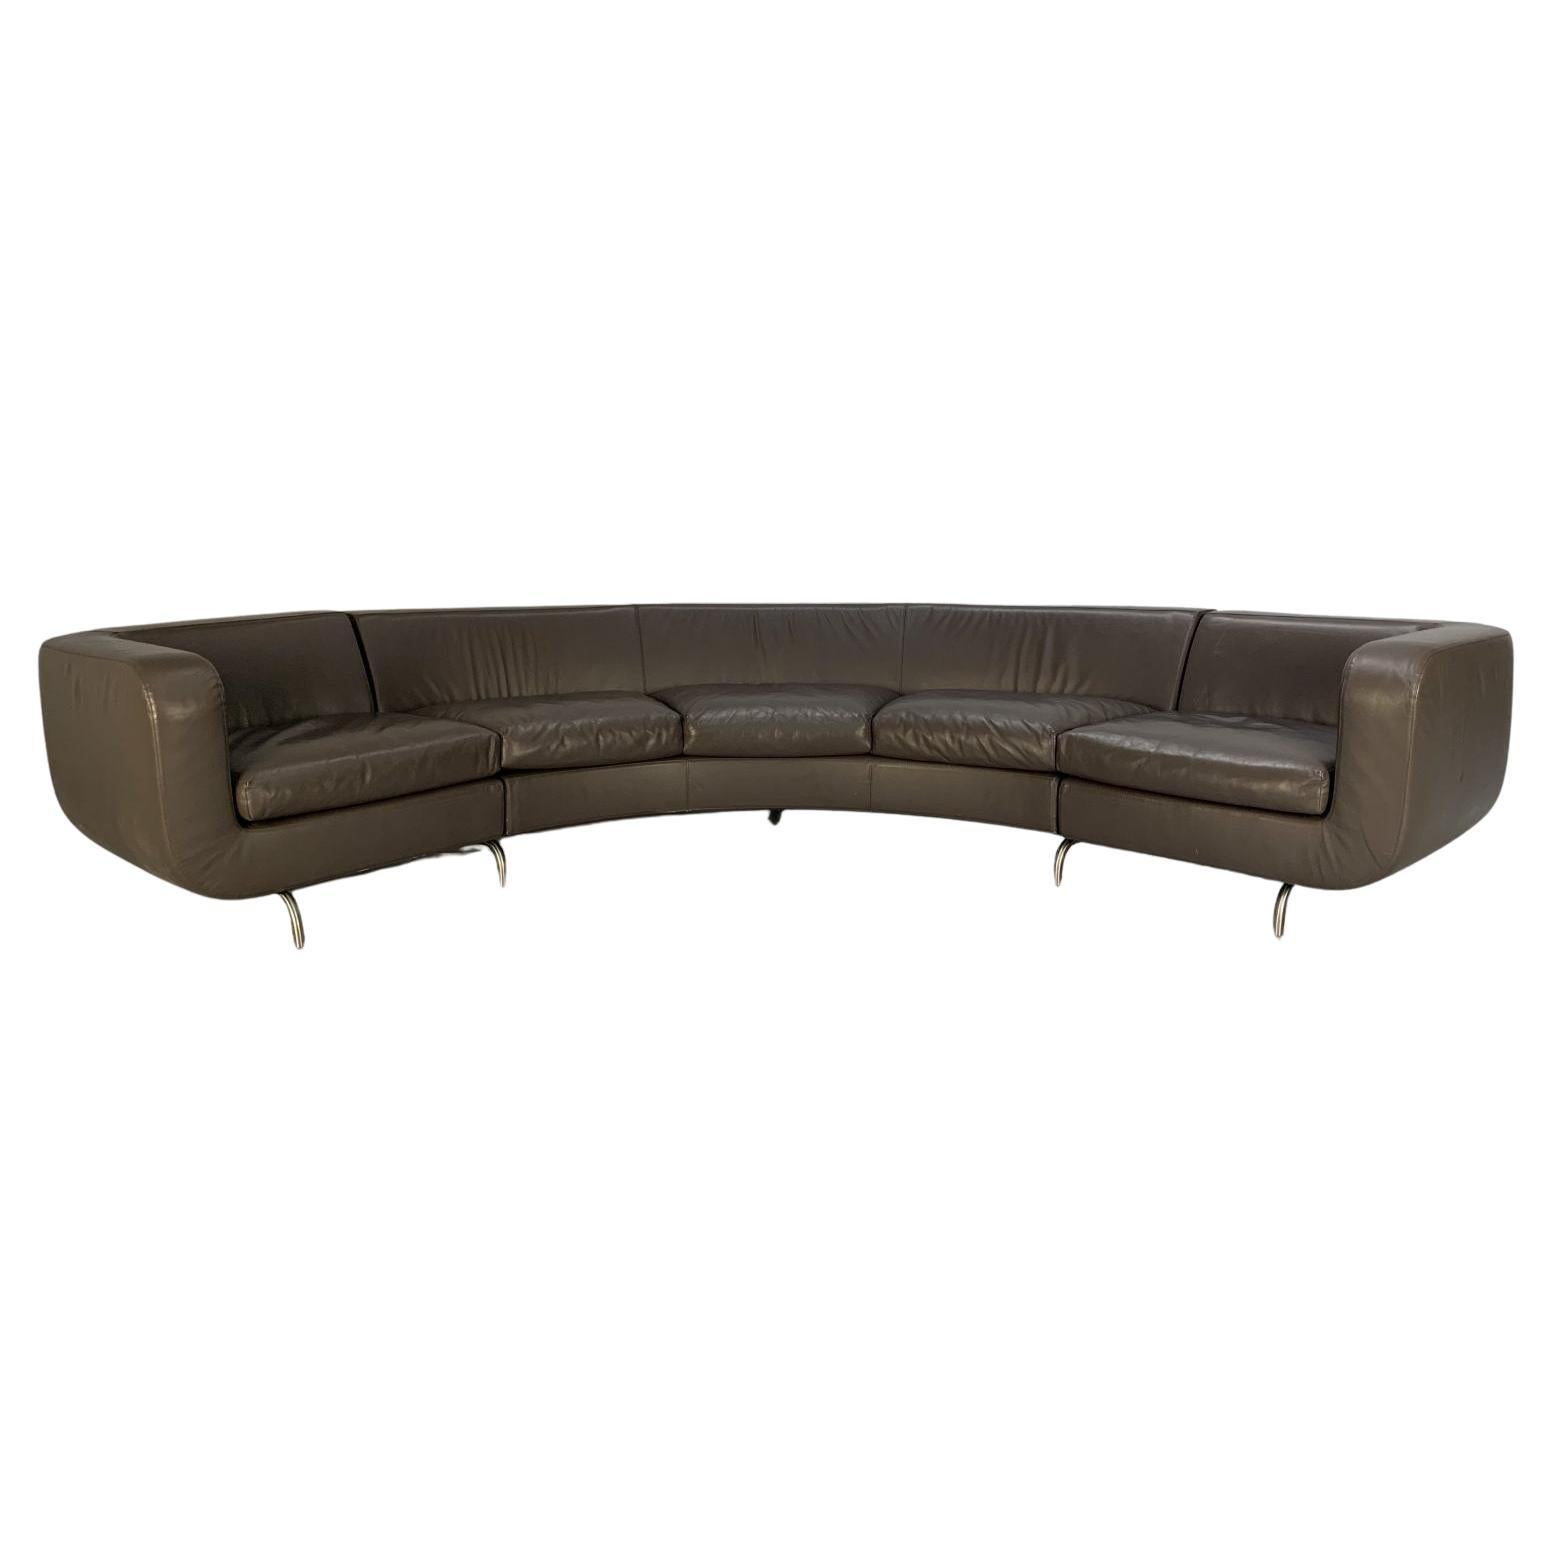 Rare Minotti “Dubuffet” Curved Sofa in Dark Grey “Pelle” Leather For Sale